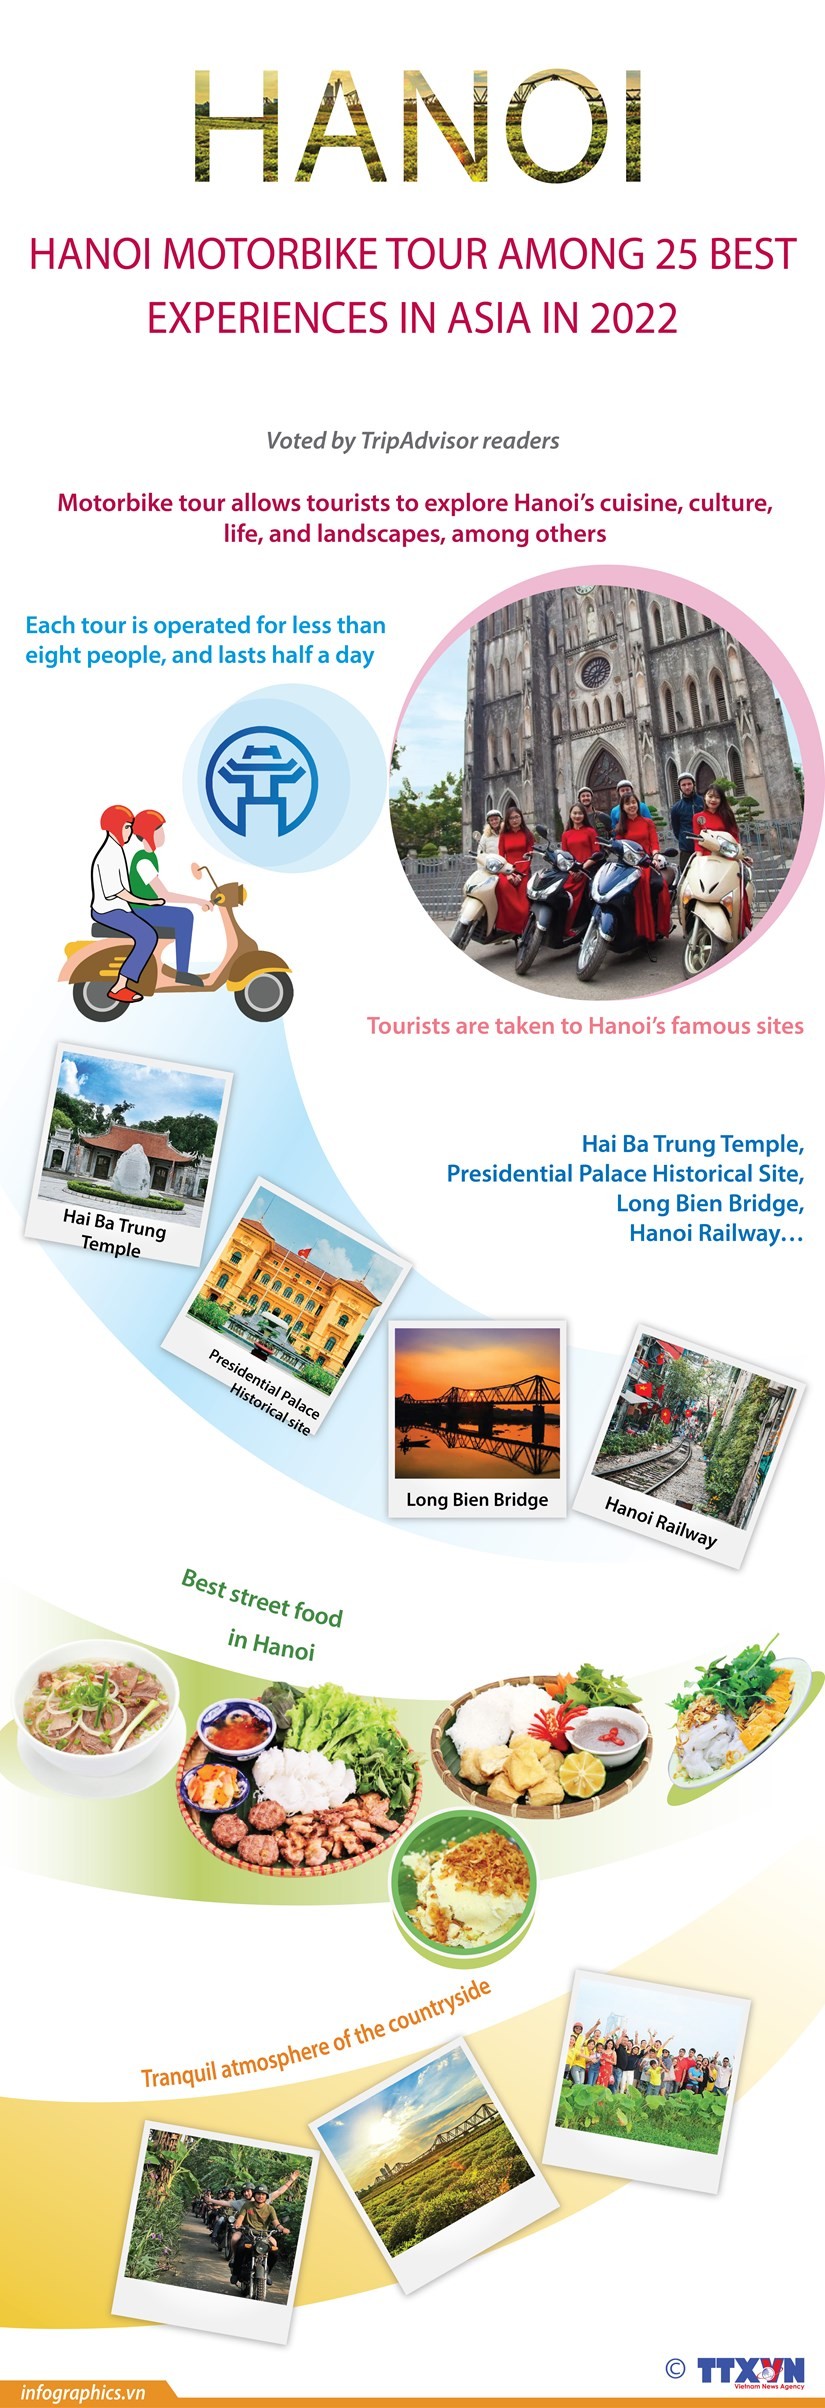 Hanoi motorbike tour among 25 best experiences in Asia in 2022